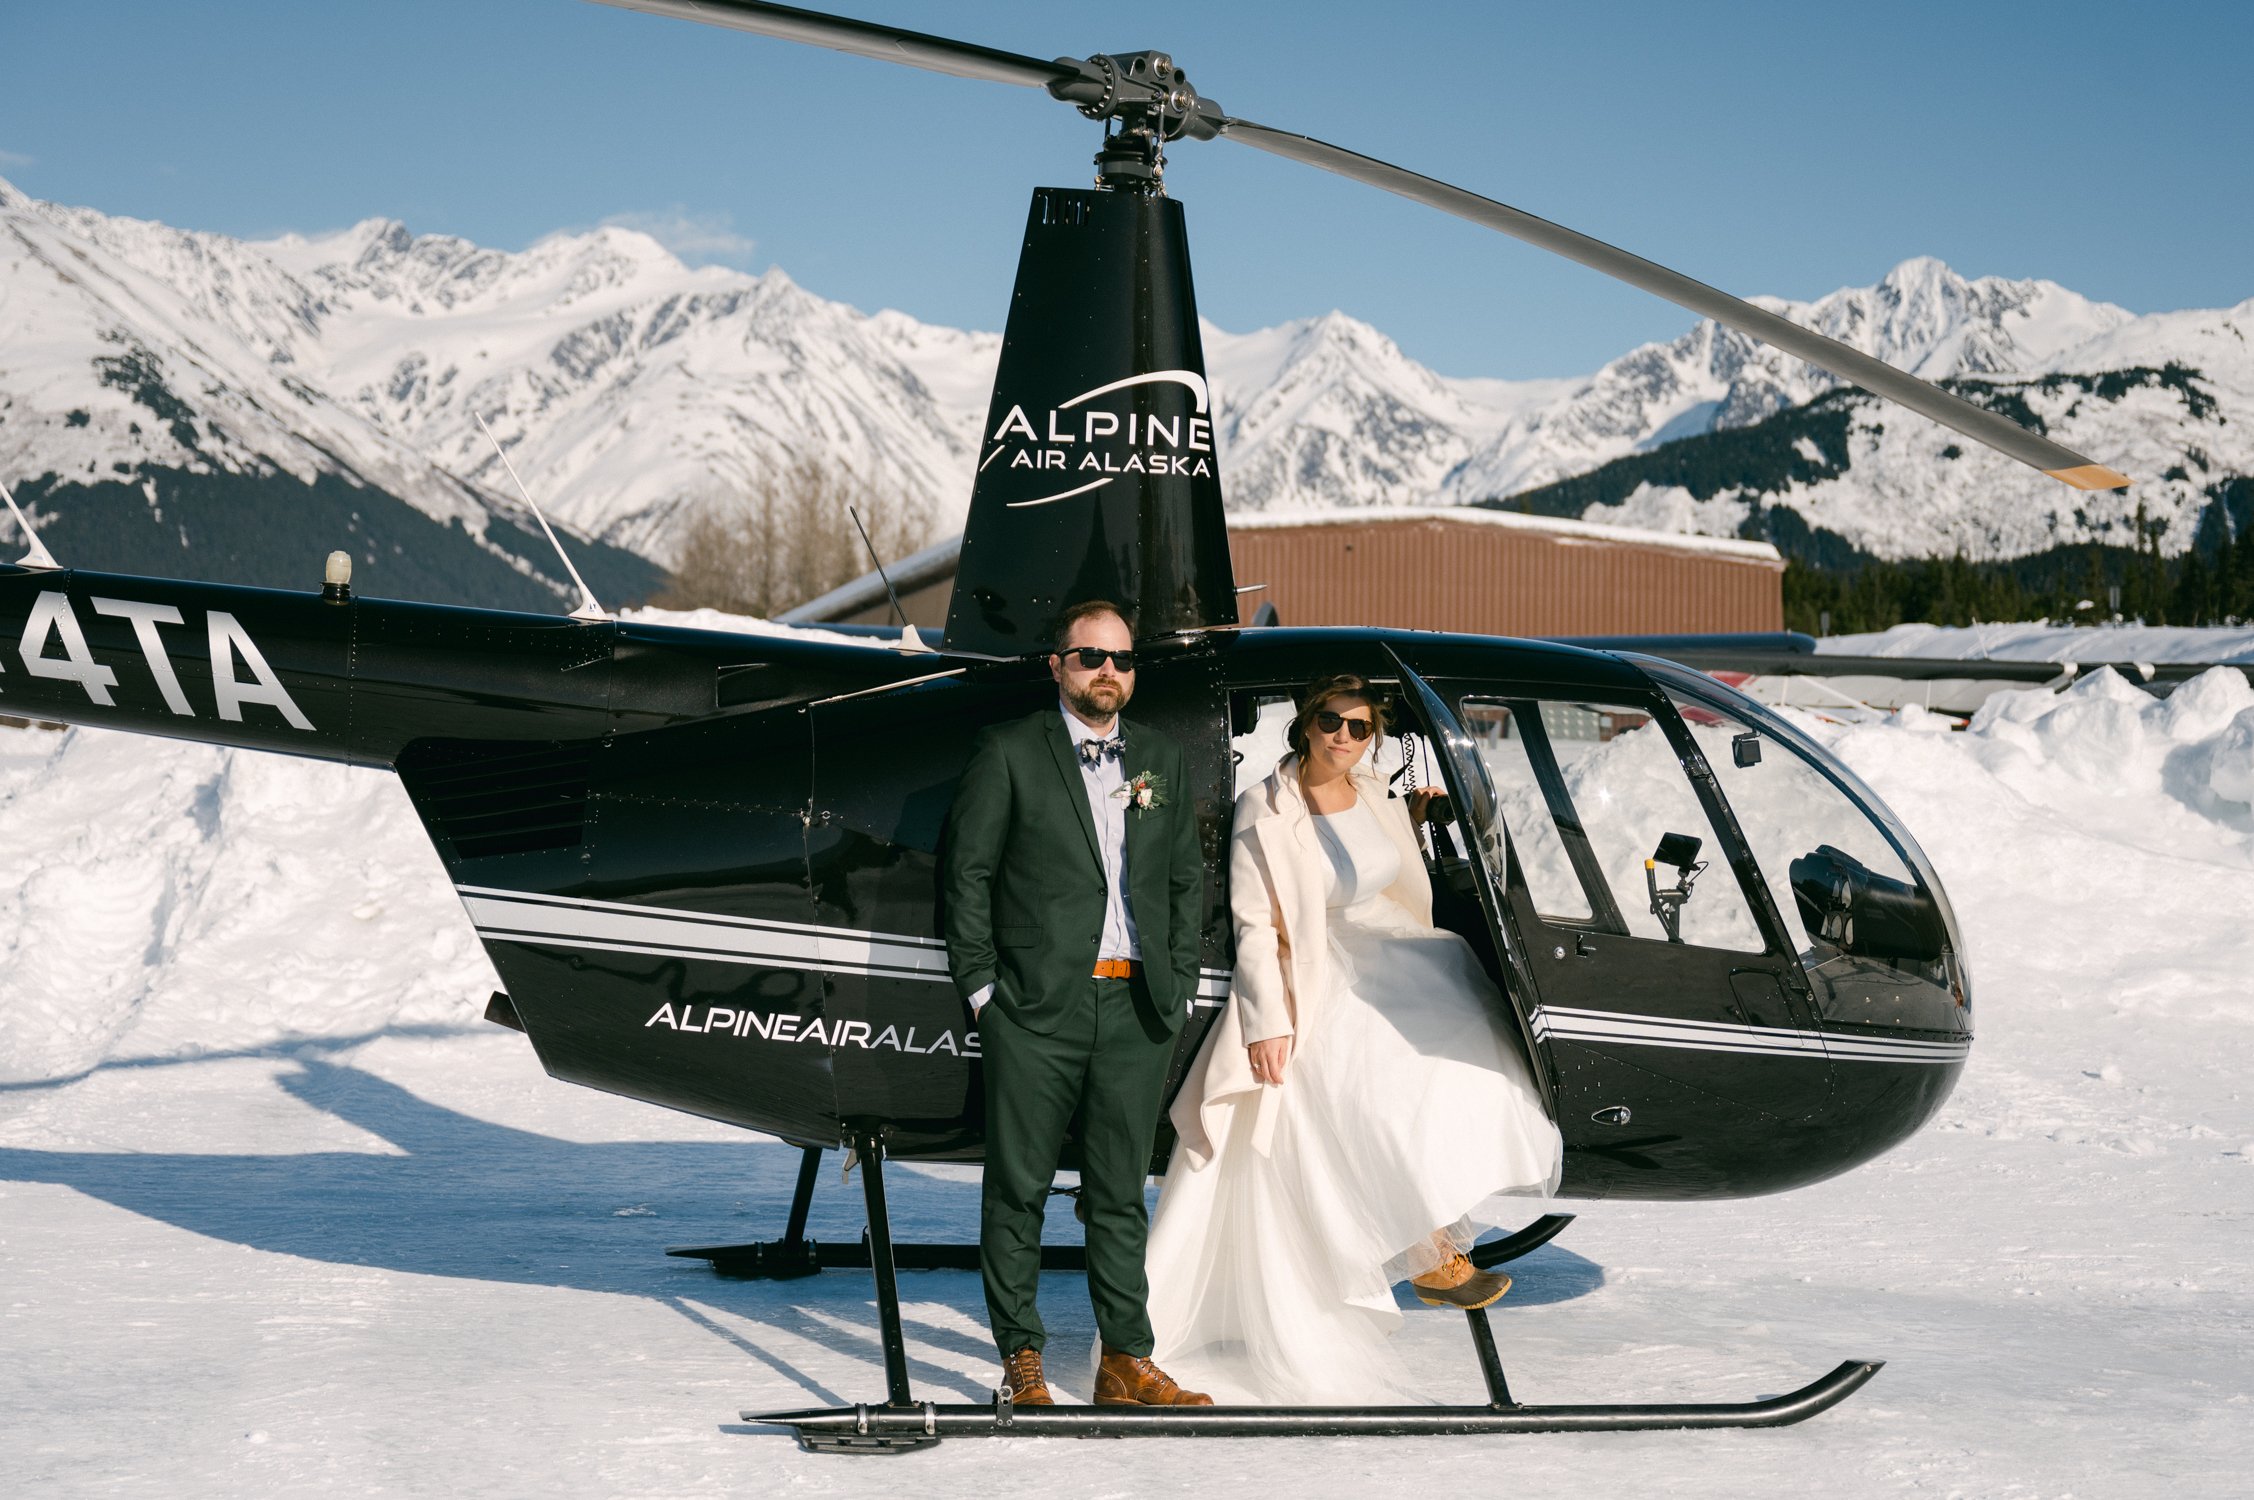 Girdwood Alaska helicopter elopement, photo of couple having their photoshoot at a glacier